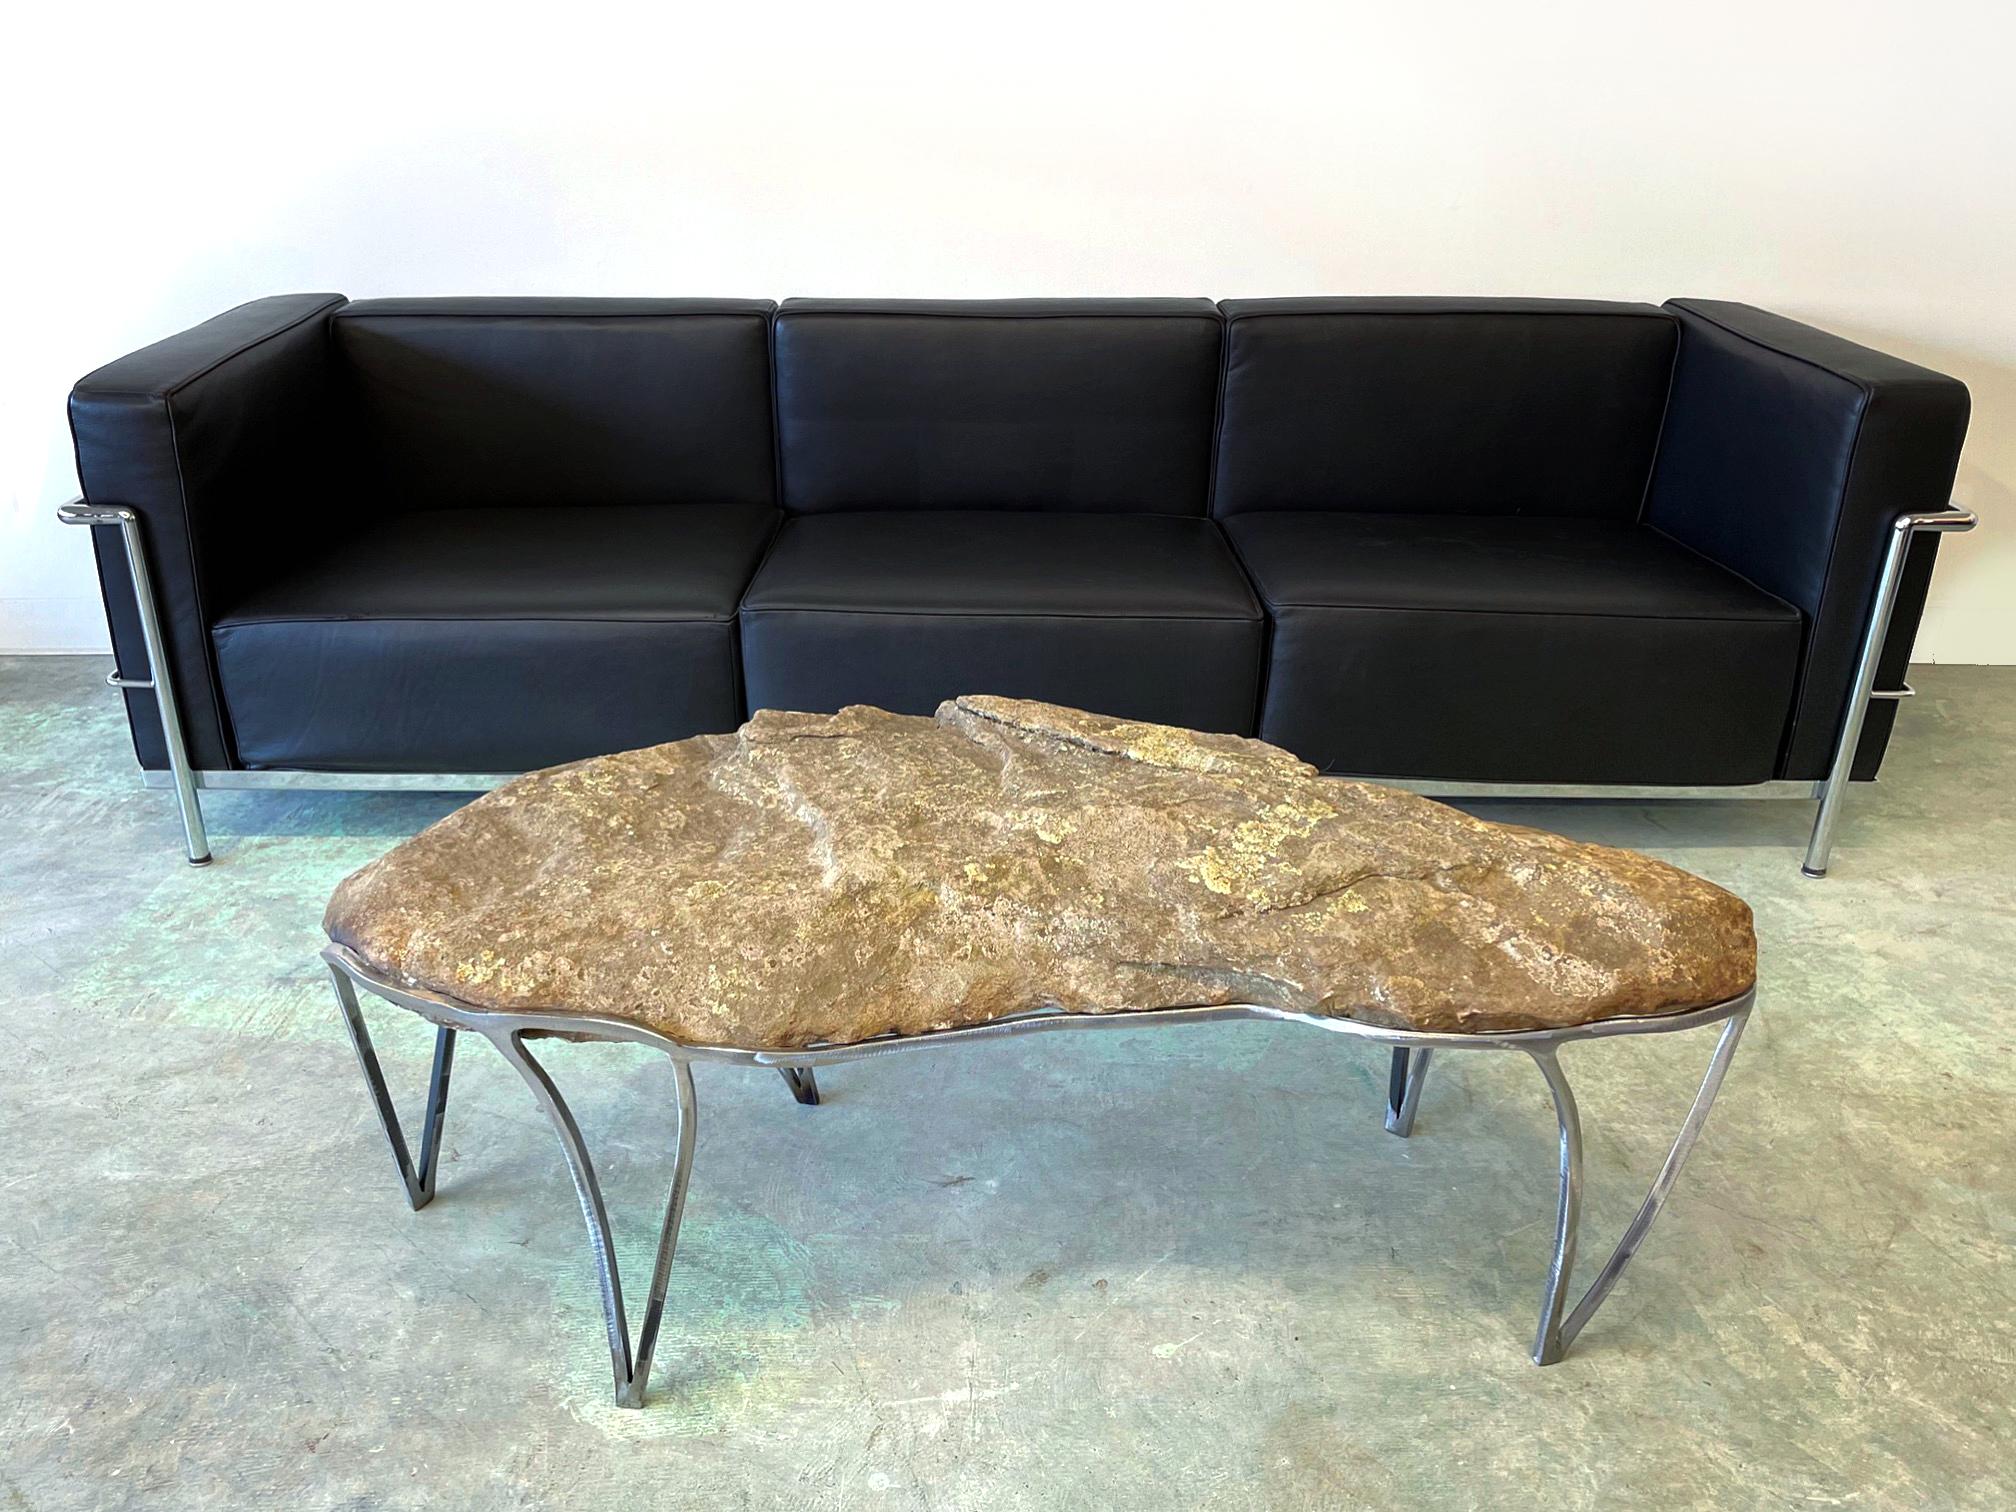 Experience the beauty of nature and the precision of Craft with this stunning coffee table crafted by Quinn Morrissette. Made from steel and natural stone, this table exemplifies the artist's mantra of 